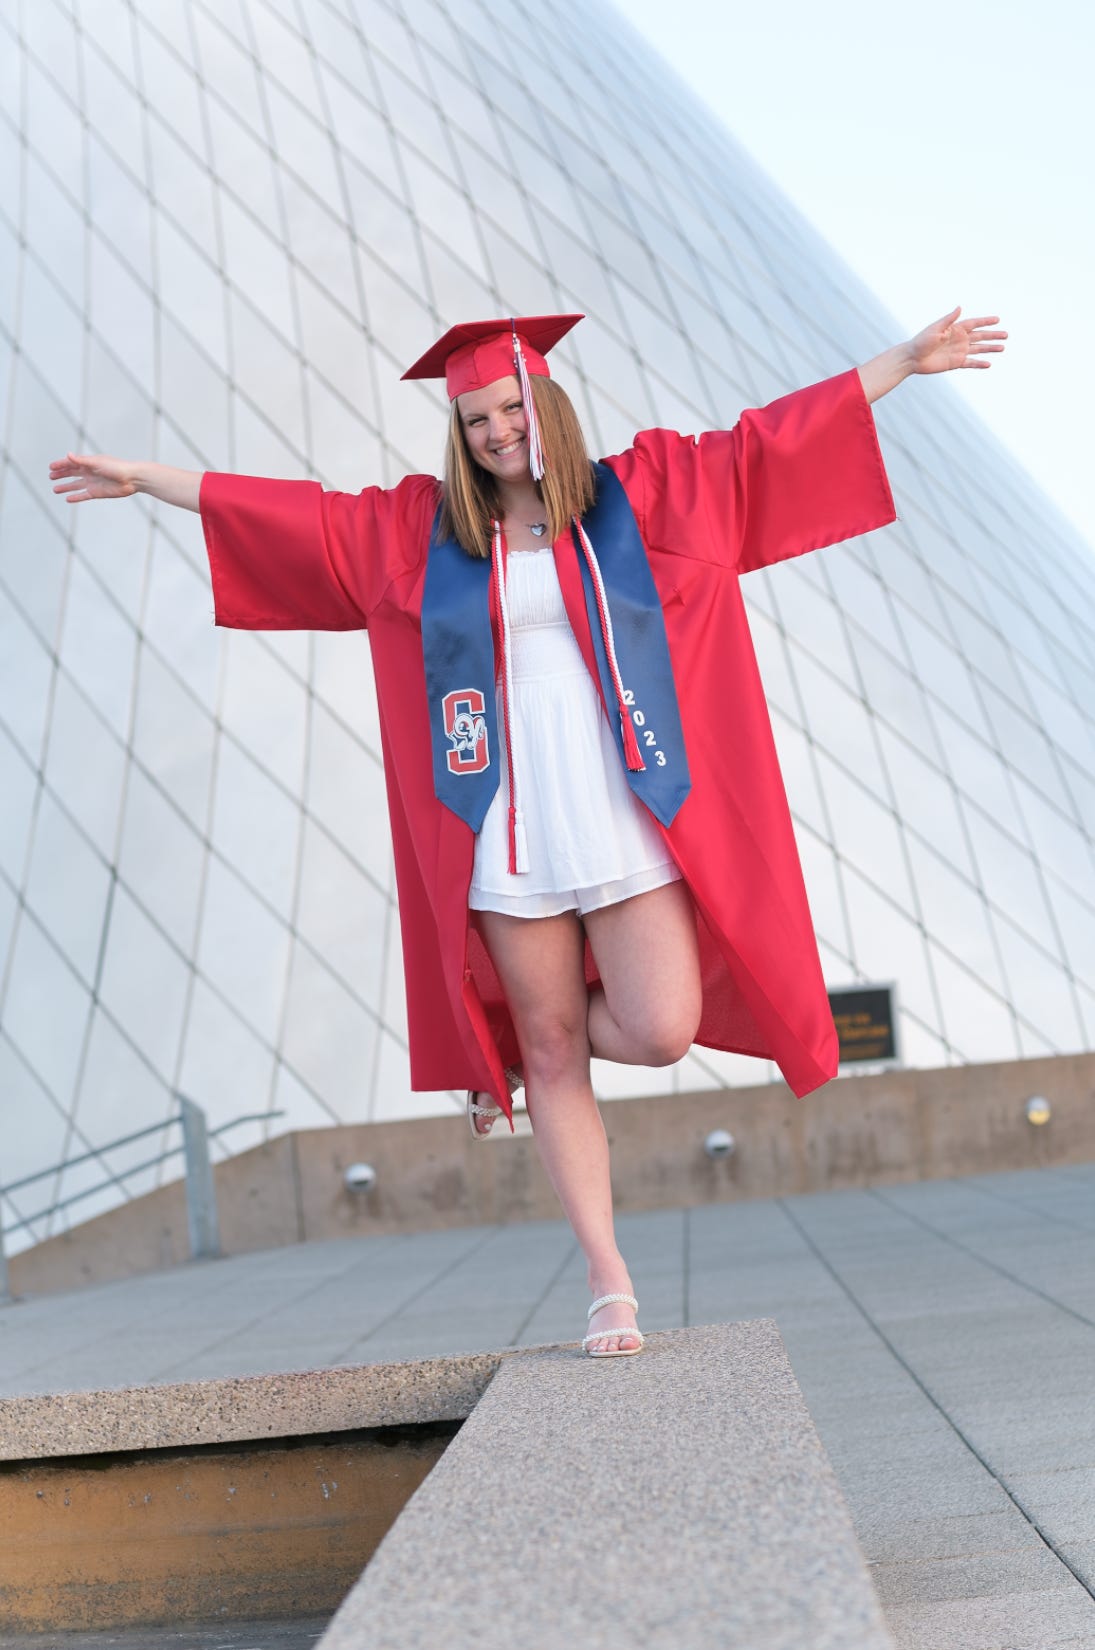 A young woman wearing a red cap and gown and a blue sash balances on one leg in front of the metal cone sculpture at the Museum of Glass